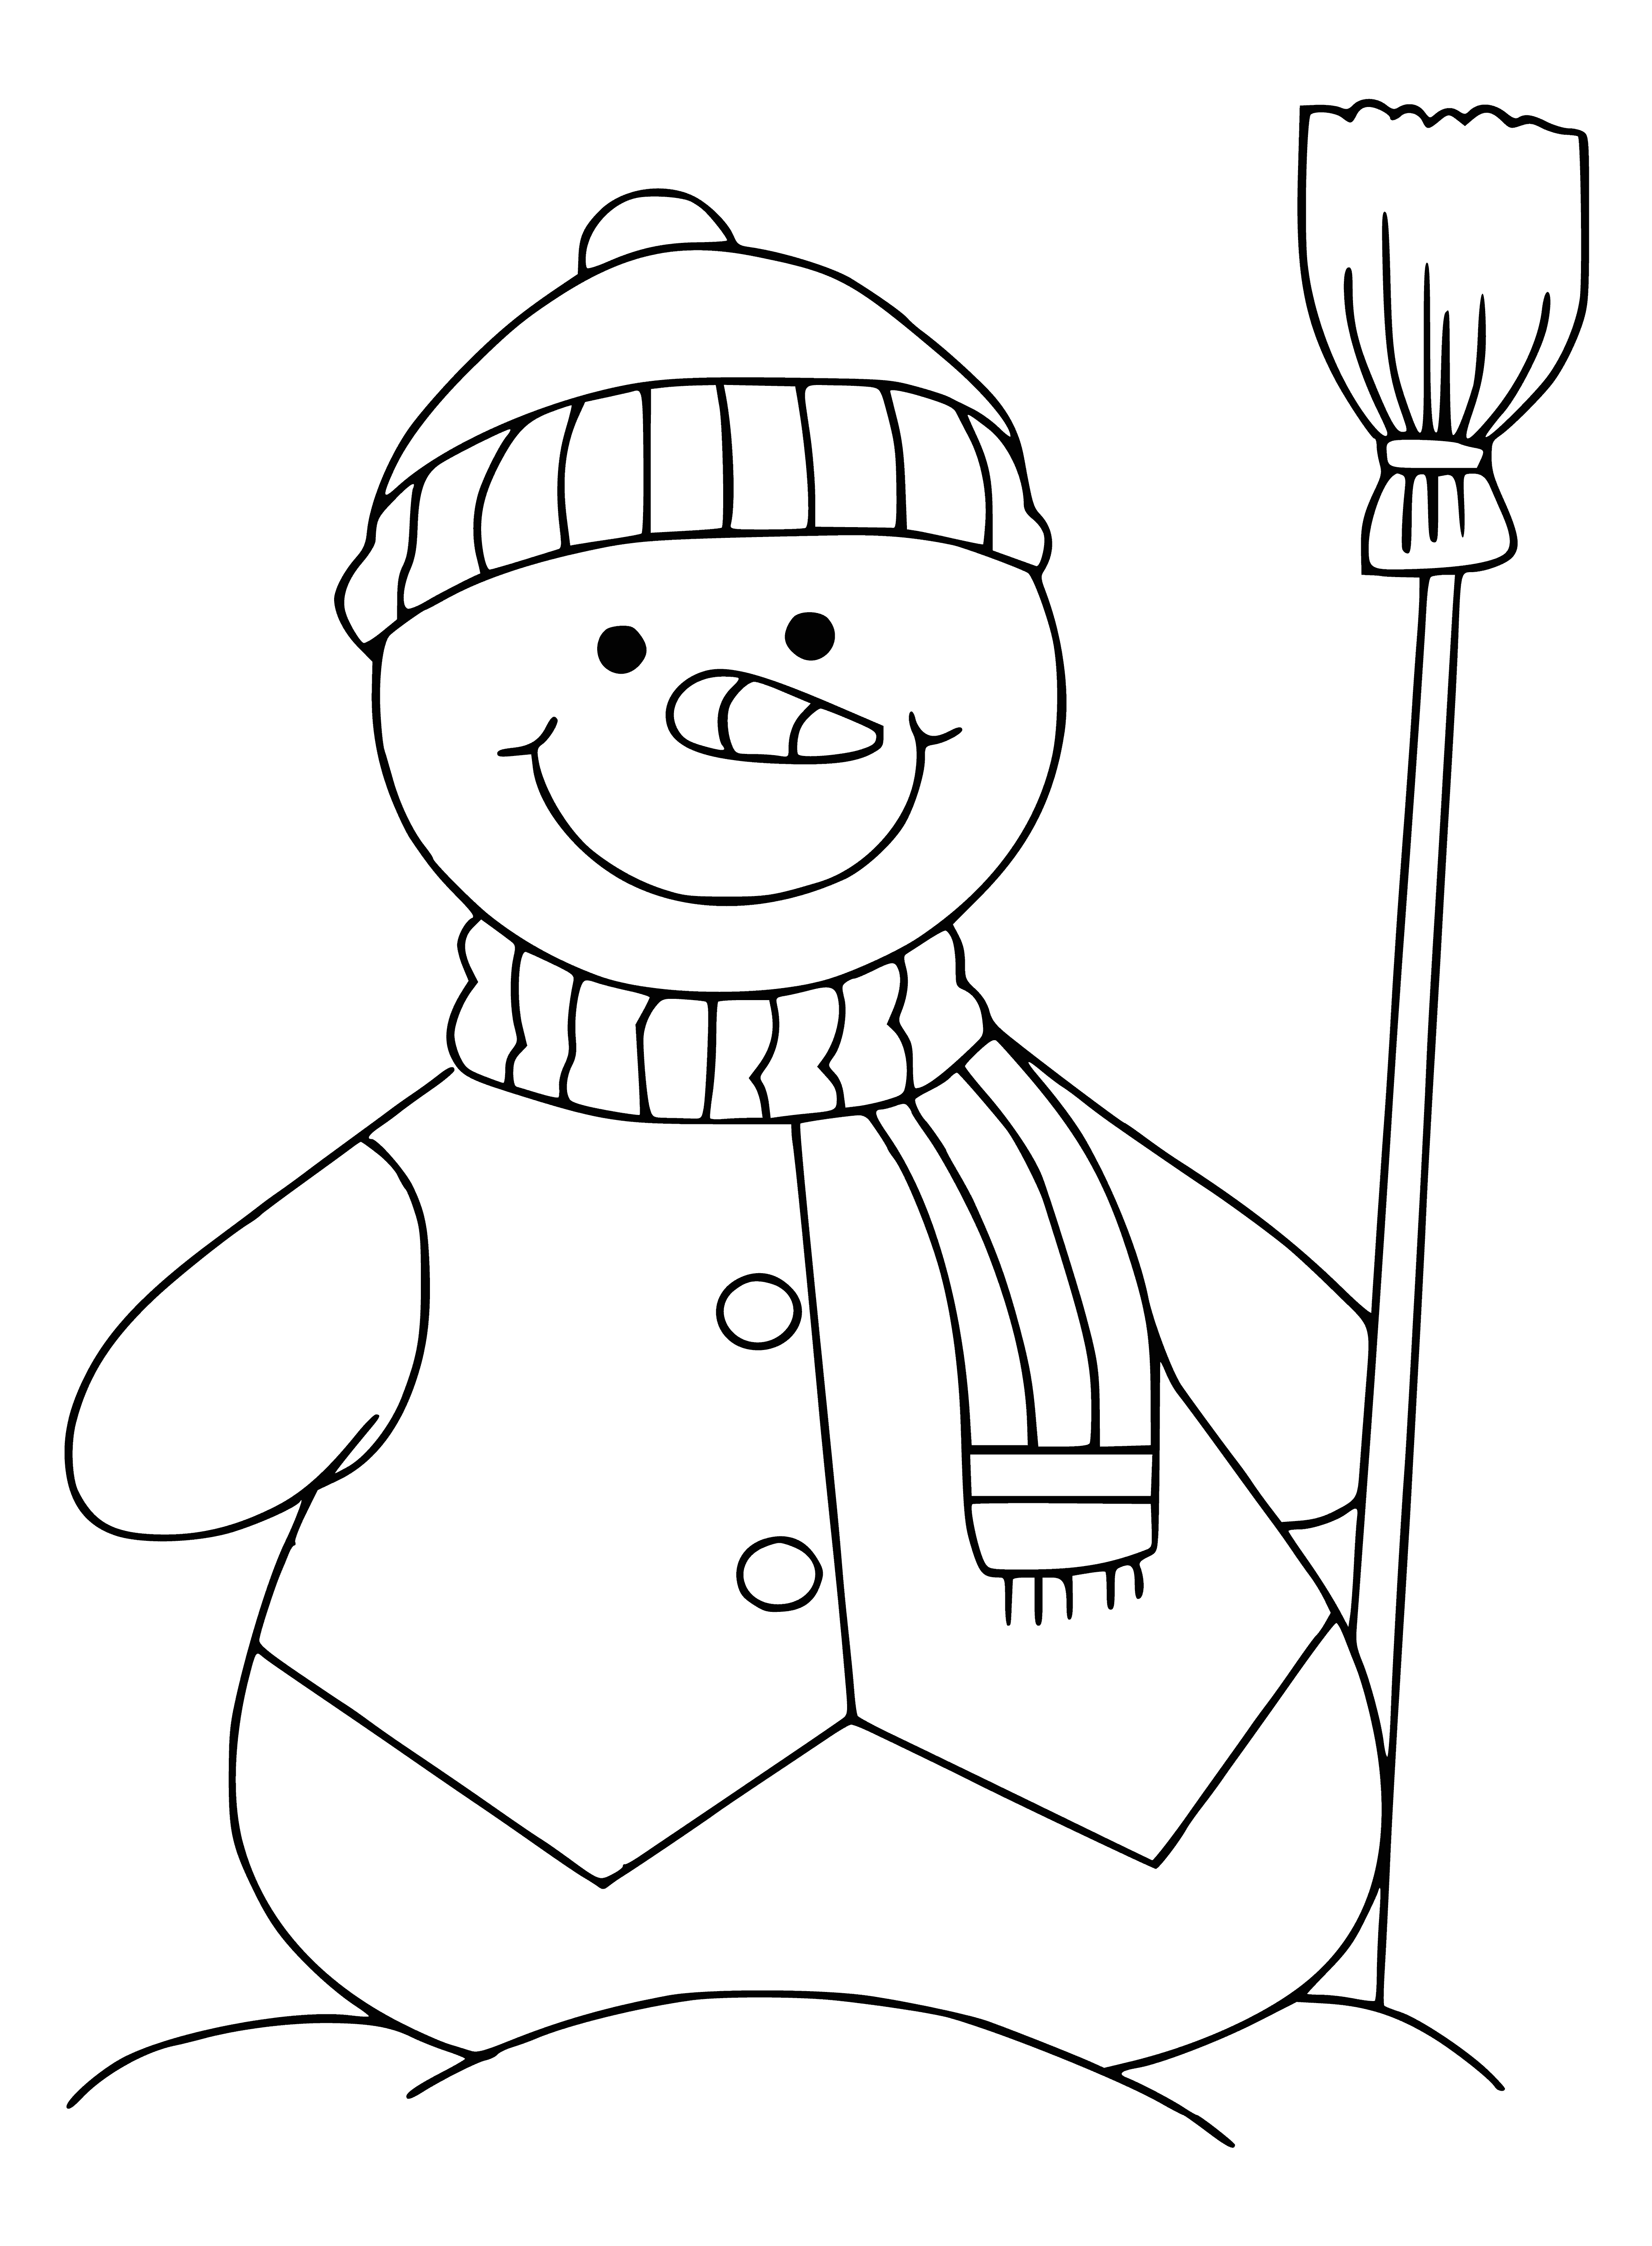 coloring page: Happy snowman with a large smile, arms outstretched, surrounded by a snowman-like scene. #snowman #snowscene